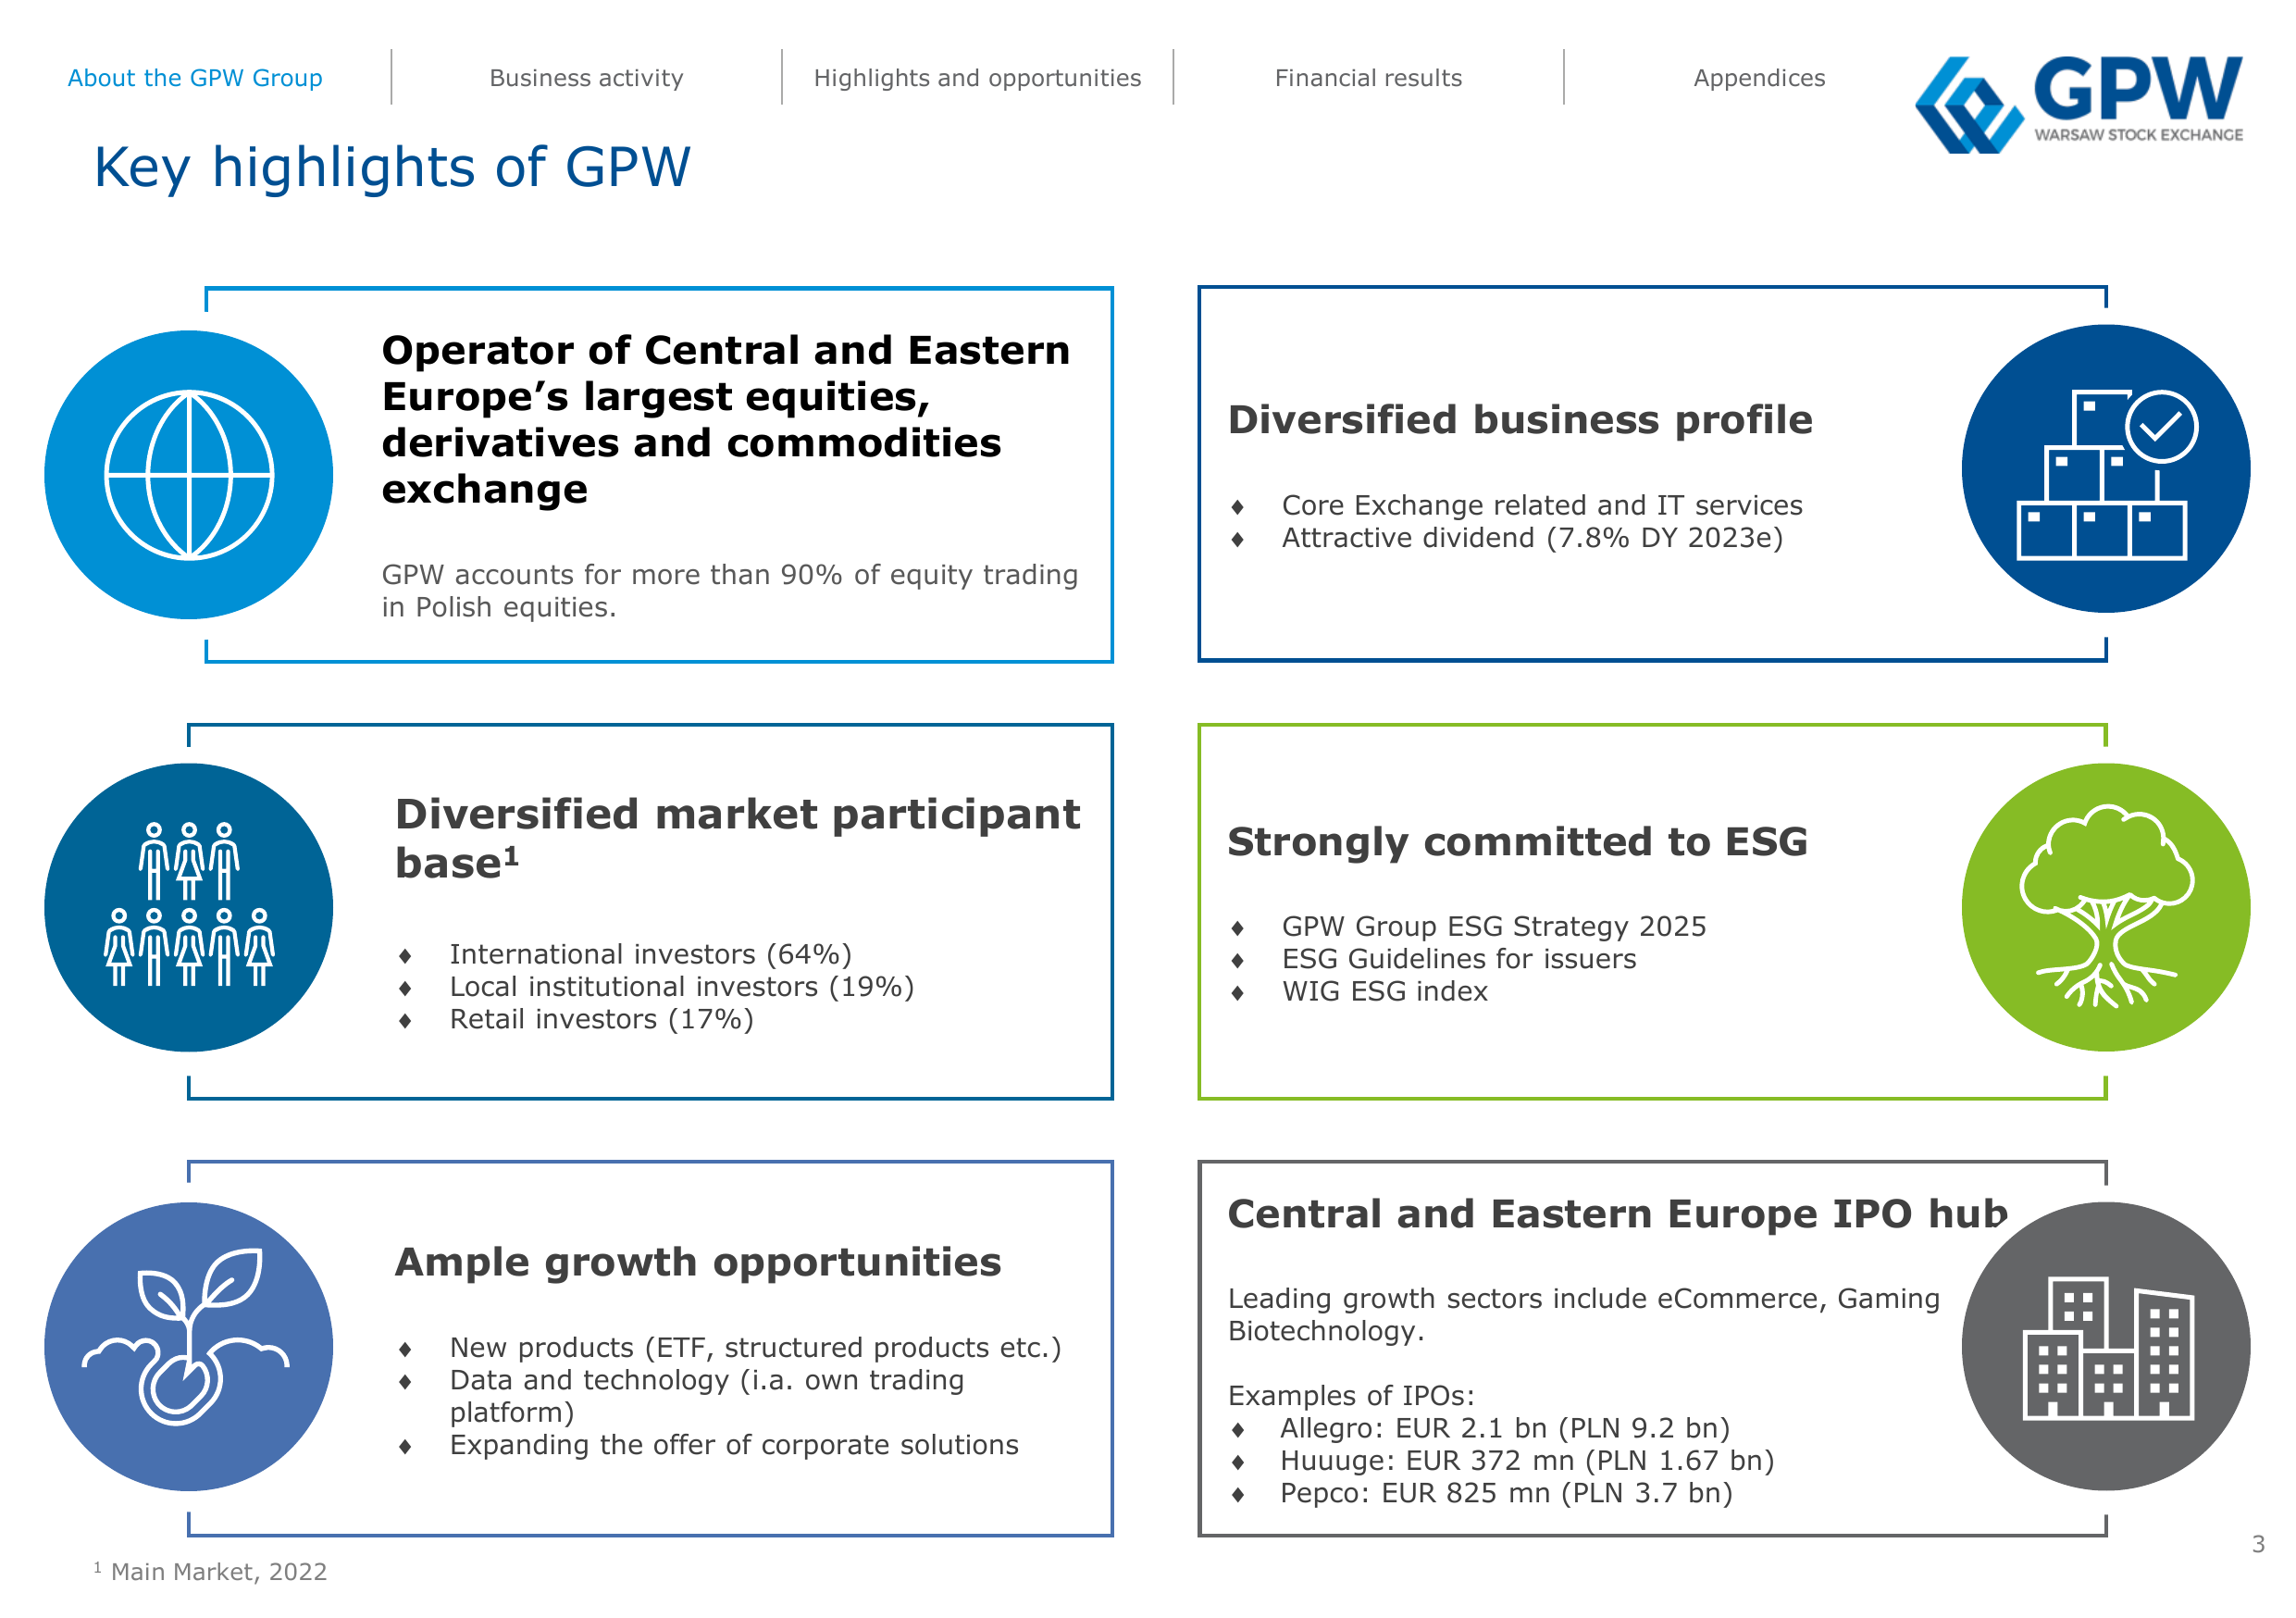 About the GPW Group 